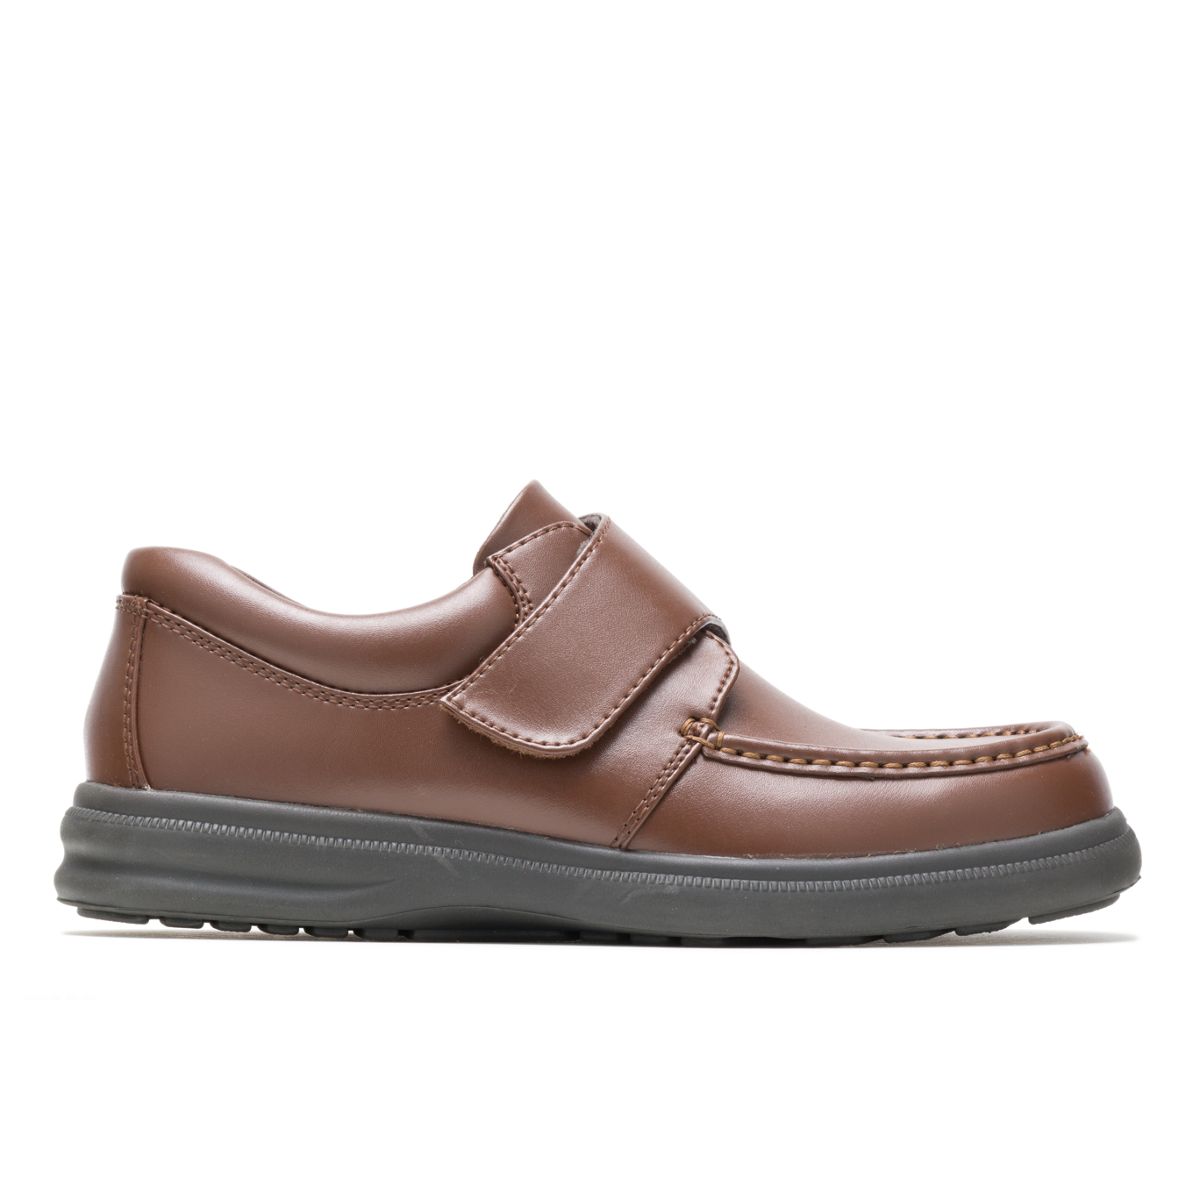 hush puppies casual shoes india